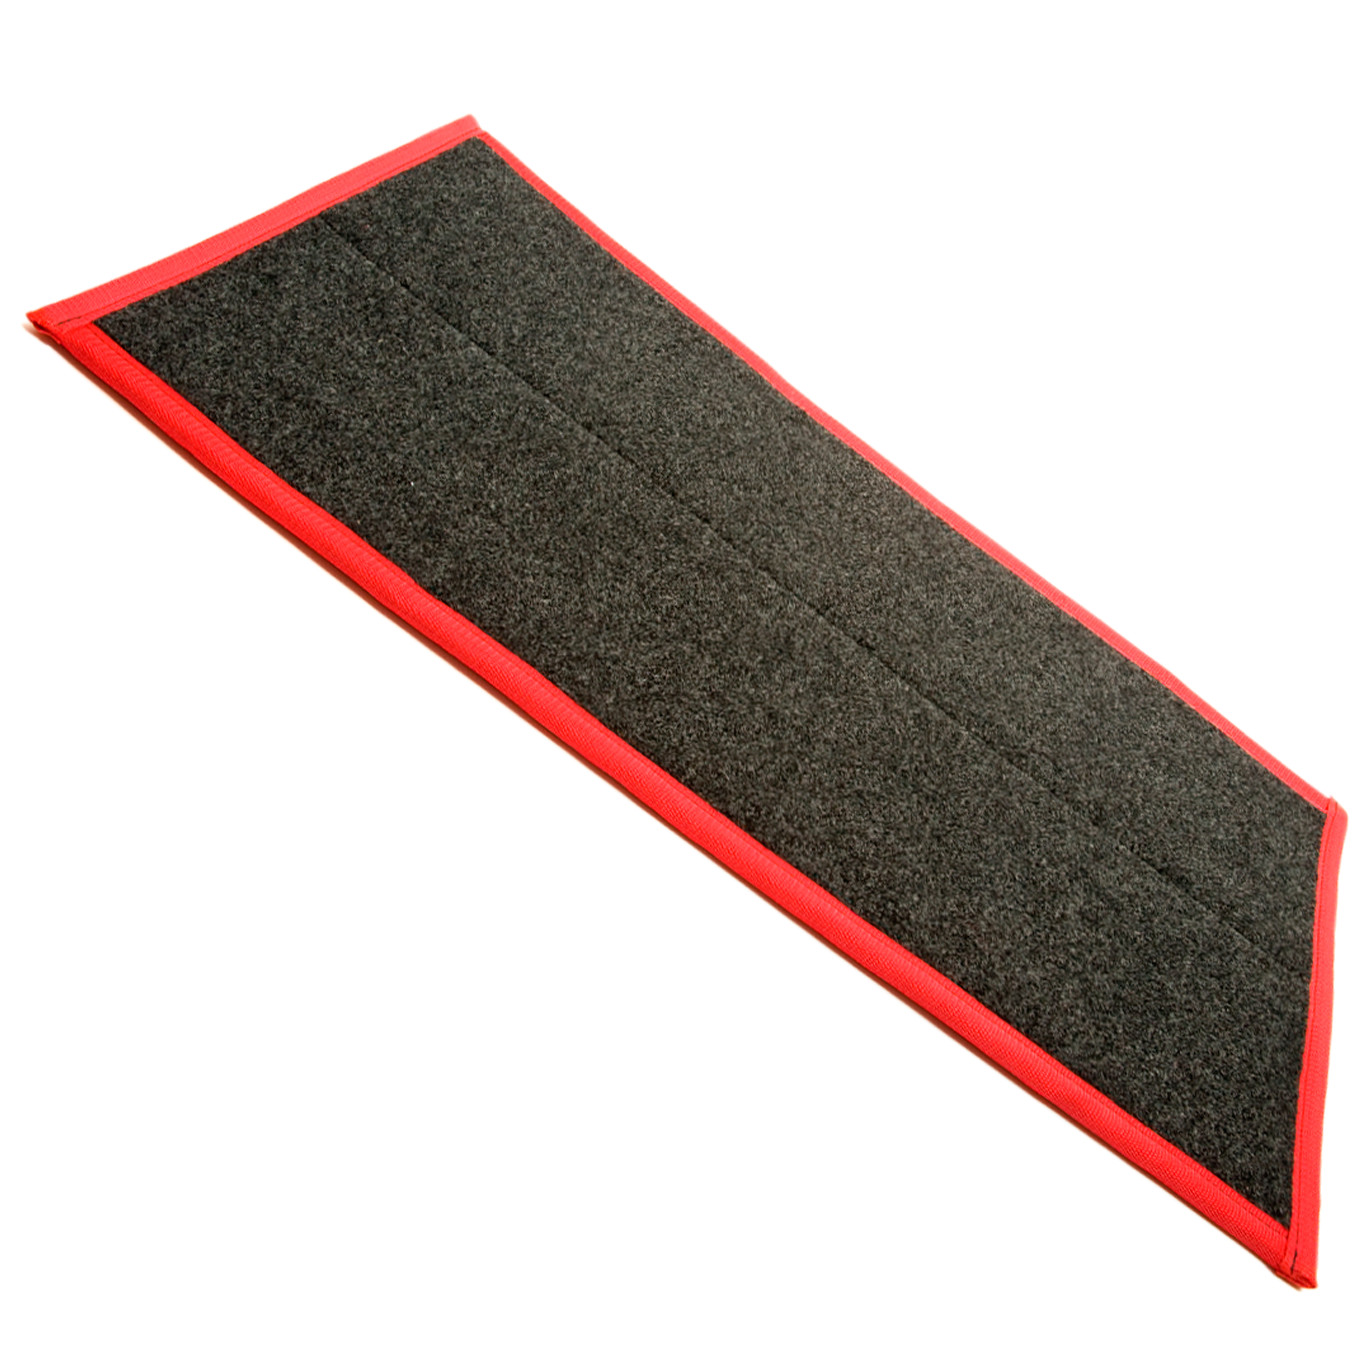 Ask a question about PureTrack Replacement Pad with Red Trim. Disinfecting Shoe Mat System.